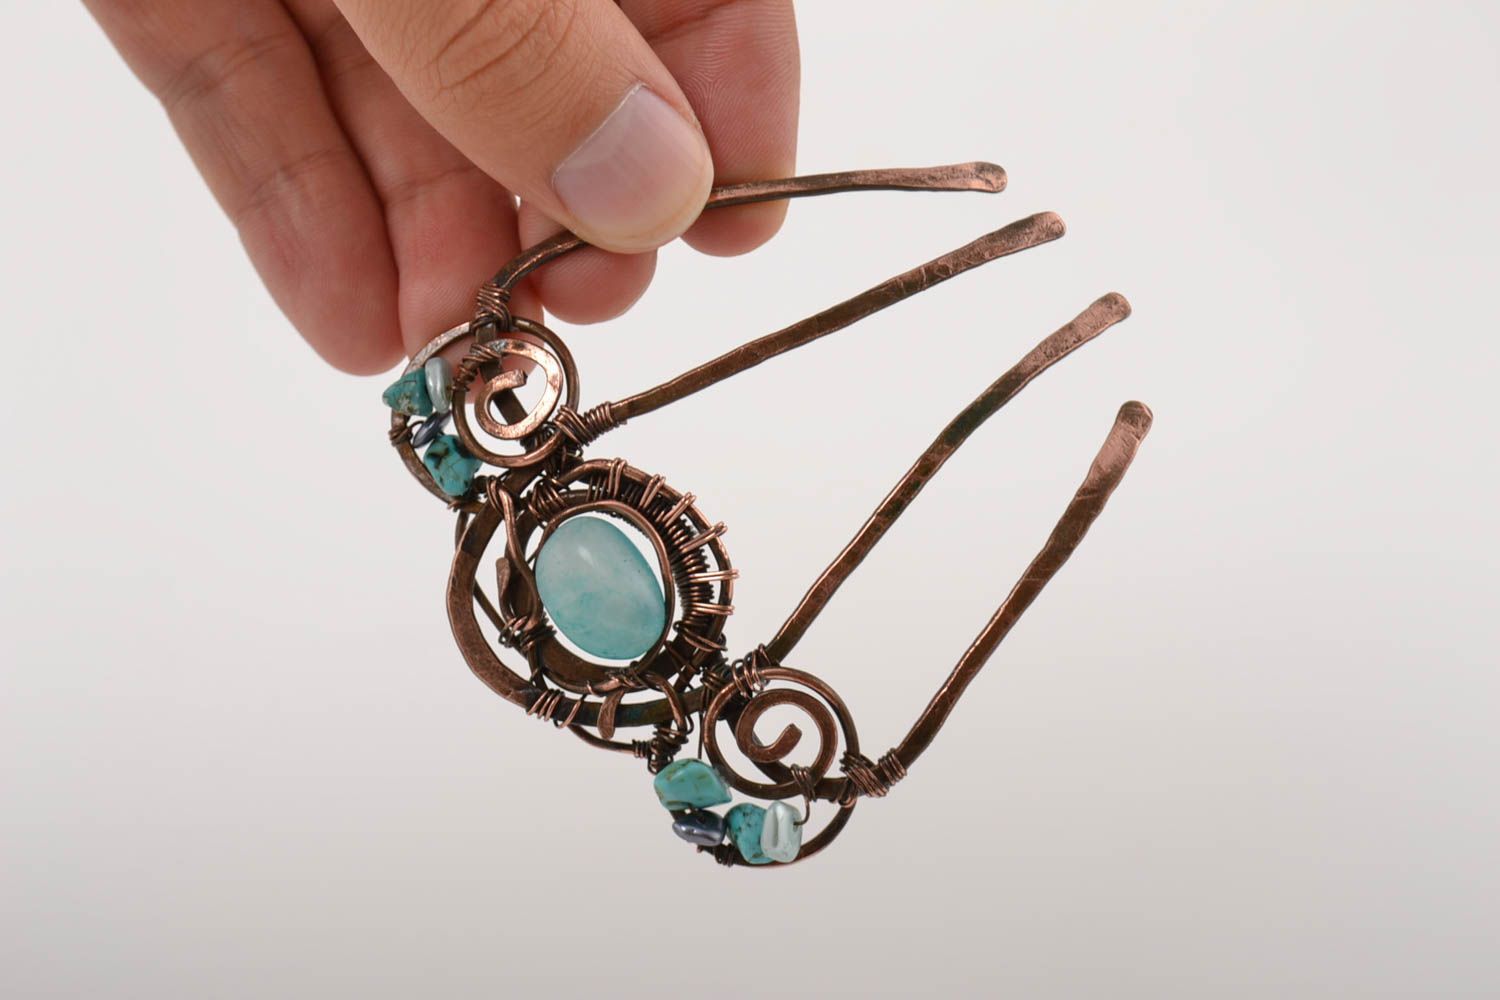 Handmade hair clip designer accessory copper jewelry unusual gift for her photo 4